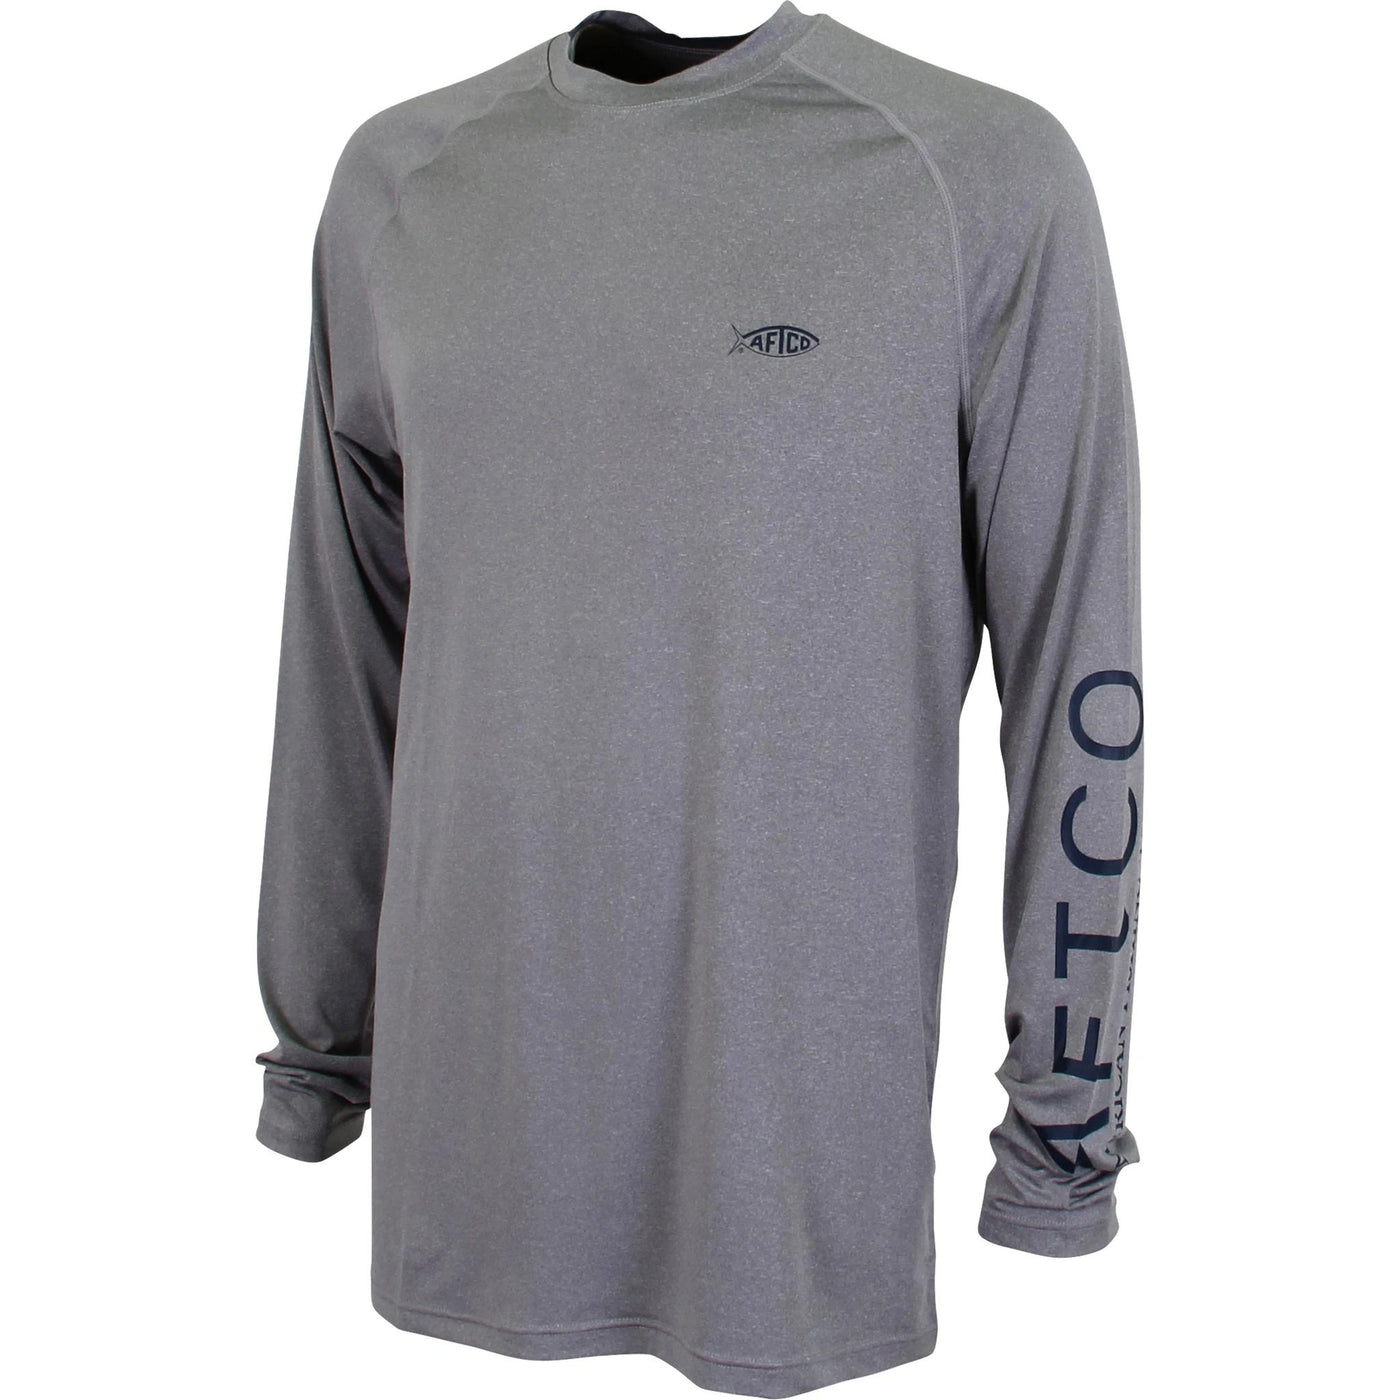 AFTCO Samurai Performance Shirt-MENS CLOTHING-Steel Heather-S-Kevin's Fine Outdoor Gear & Apparel